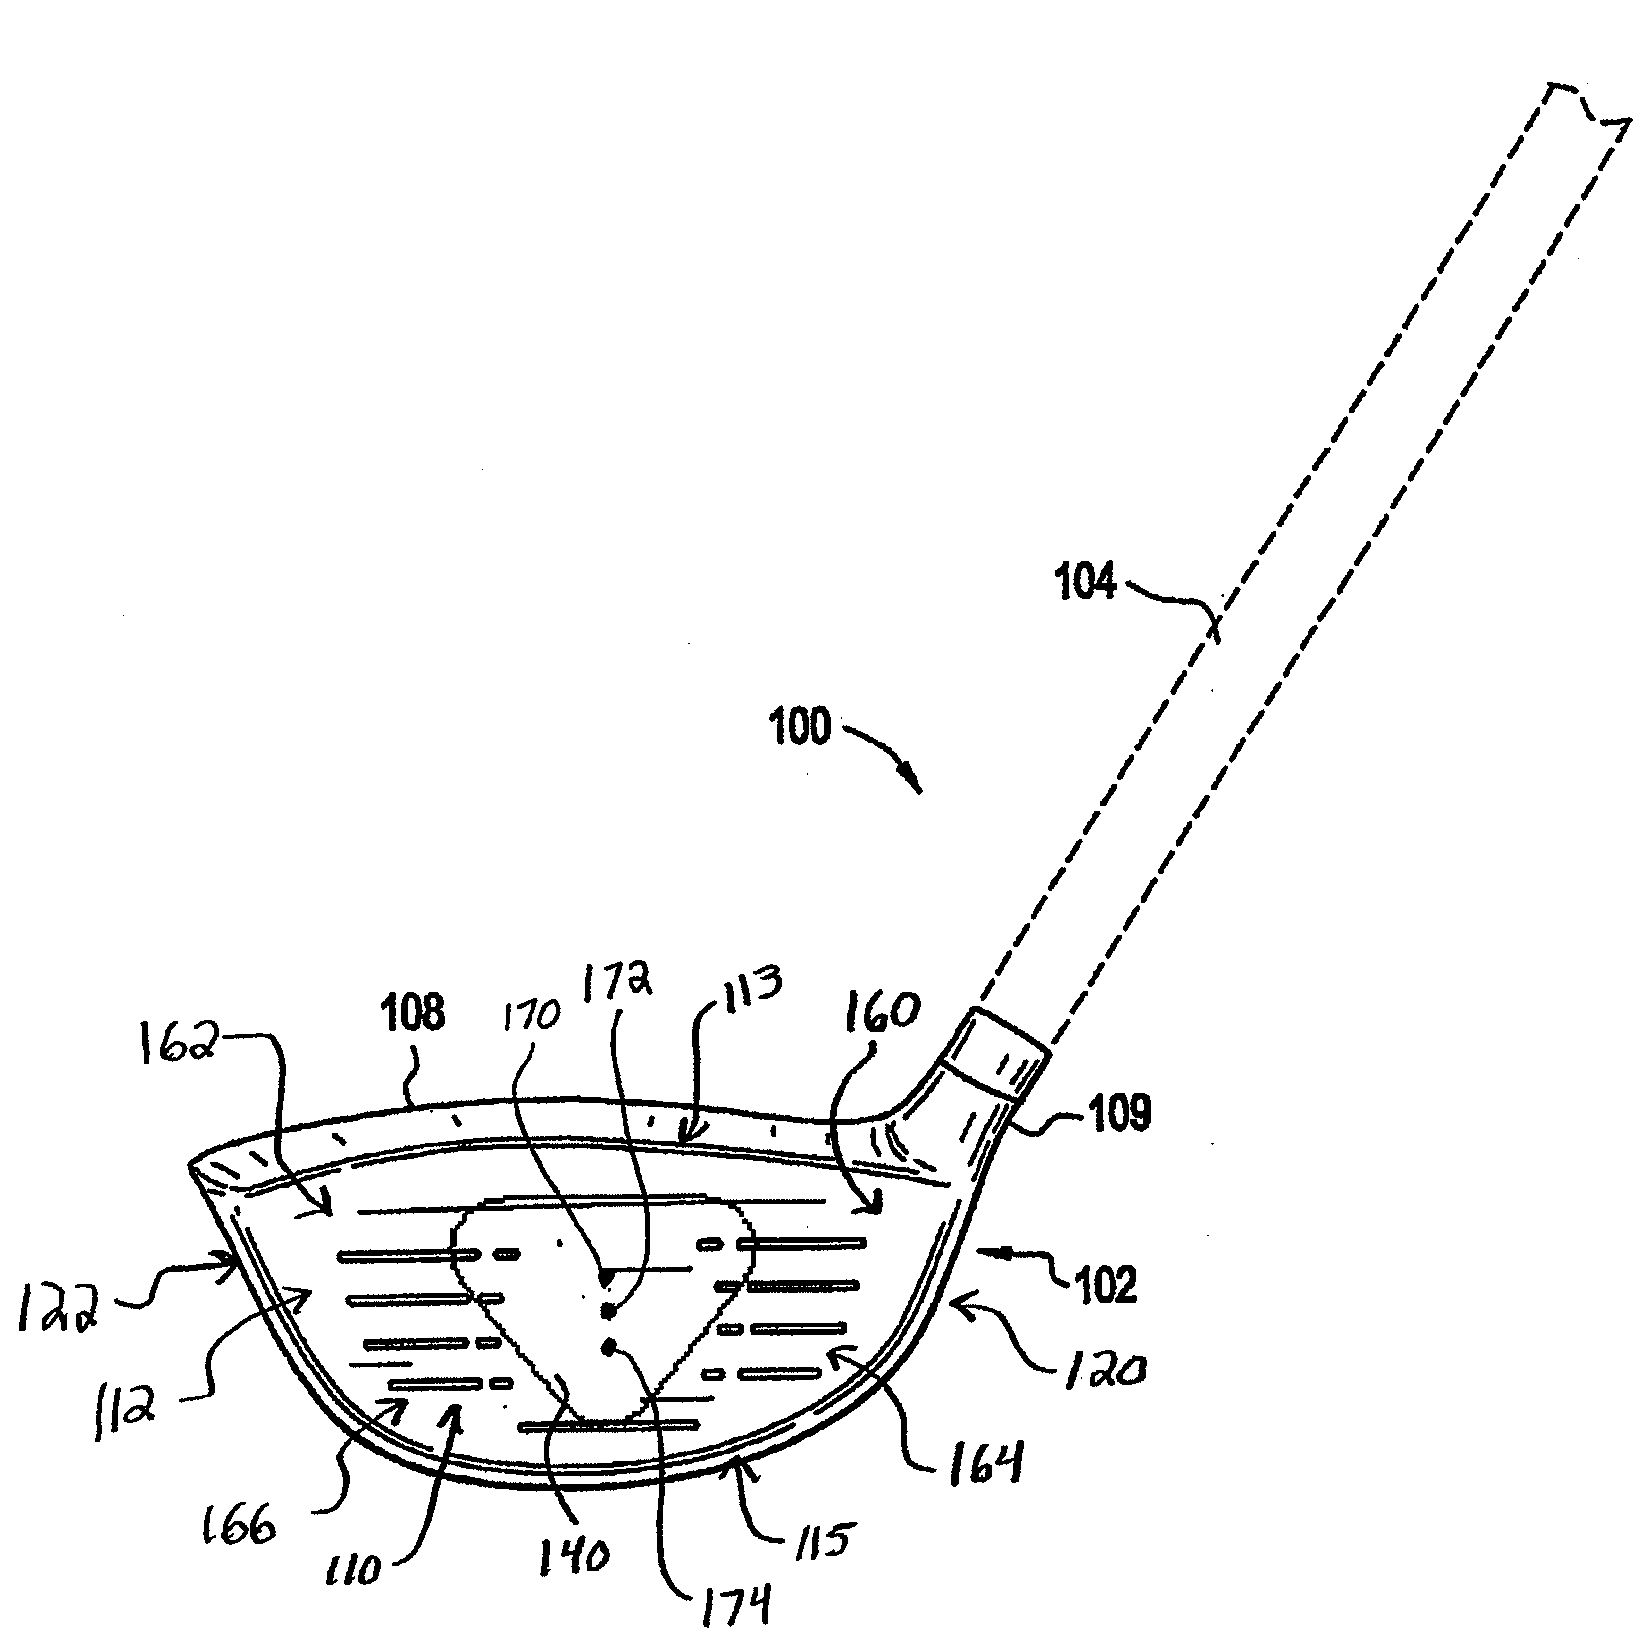 Golf club head or other ball striking device having face insert